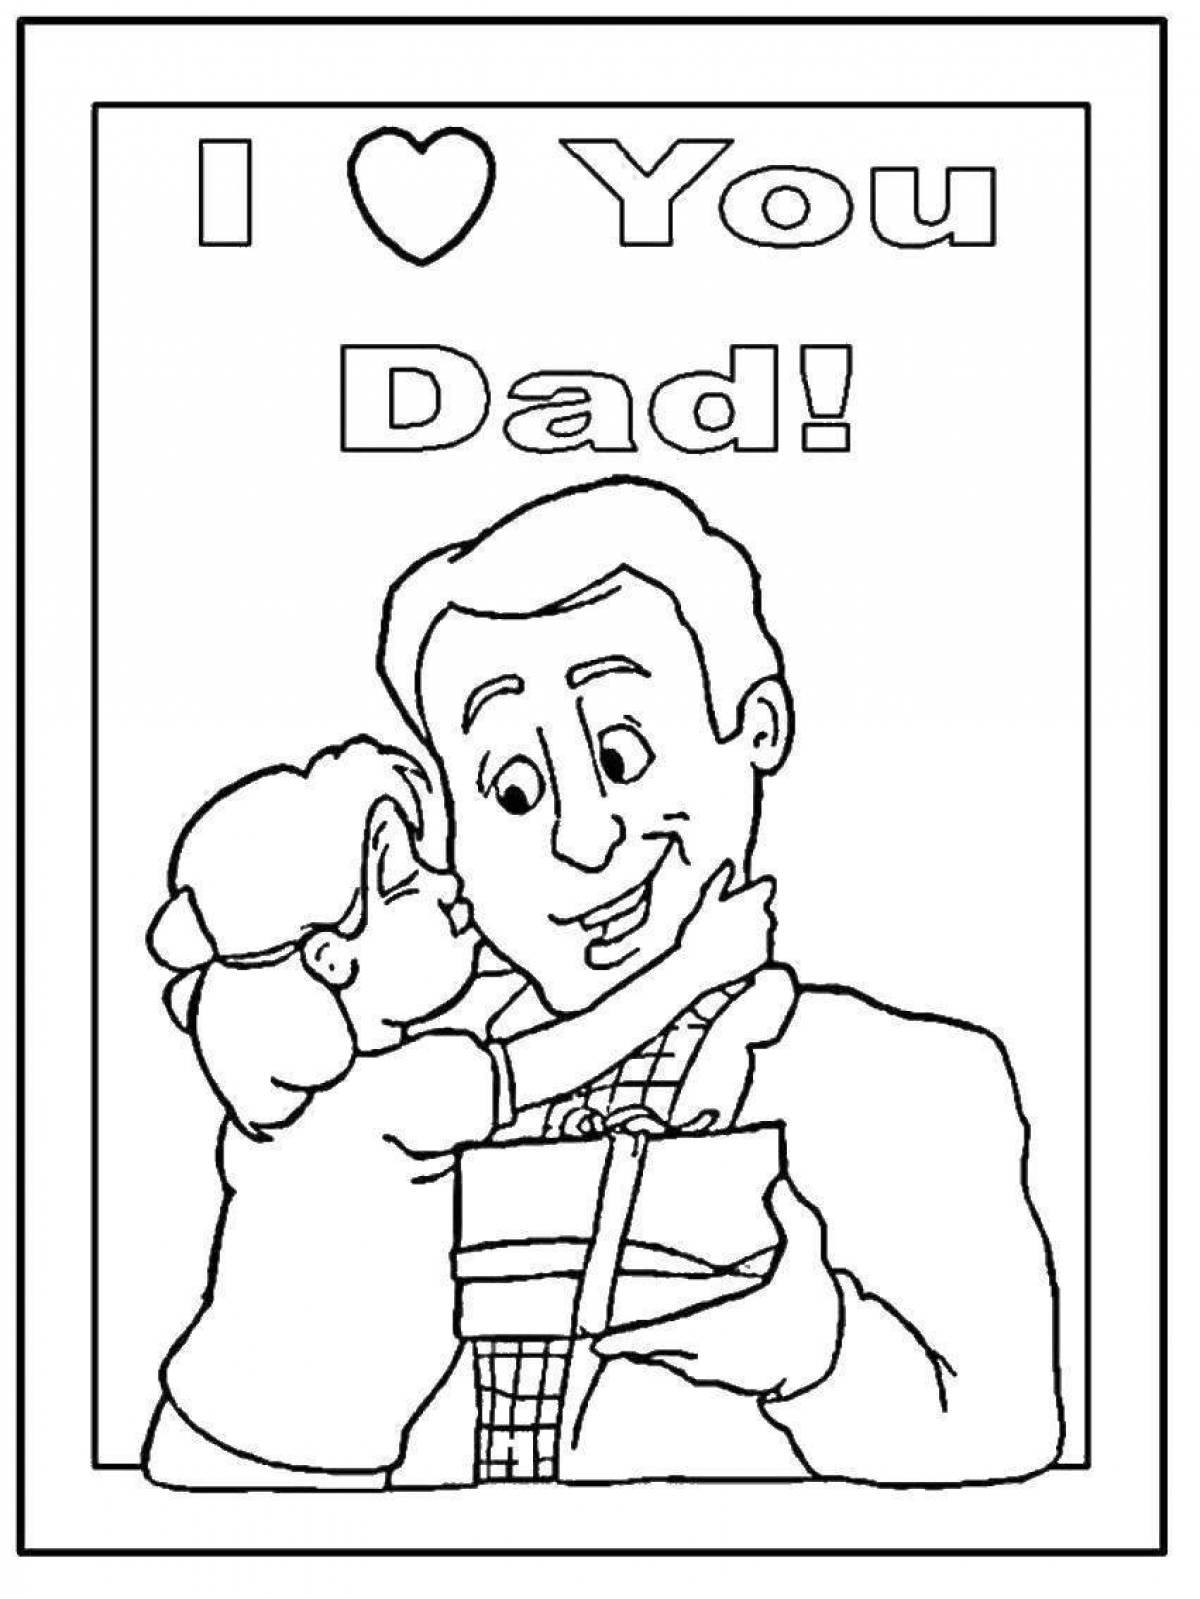 Fabulous coloring book dad from daughter